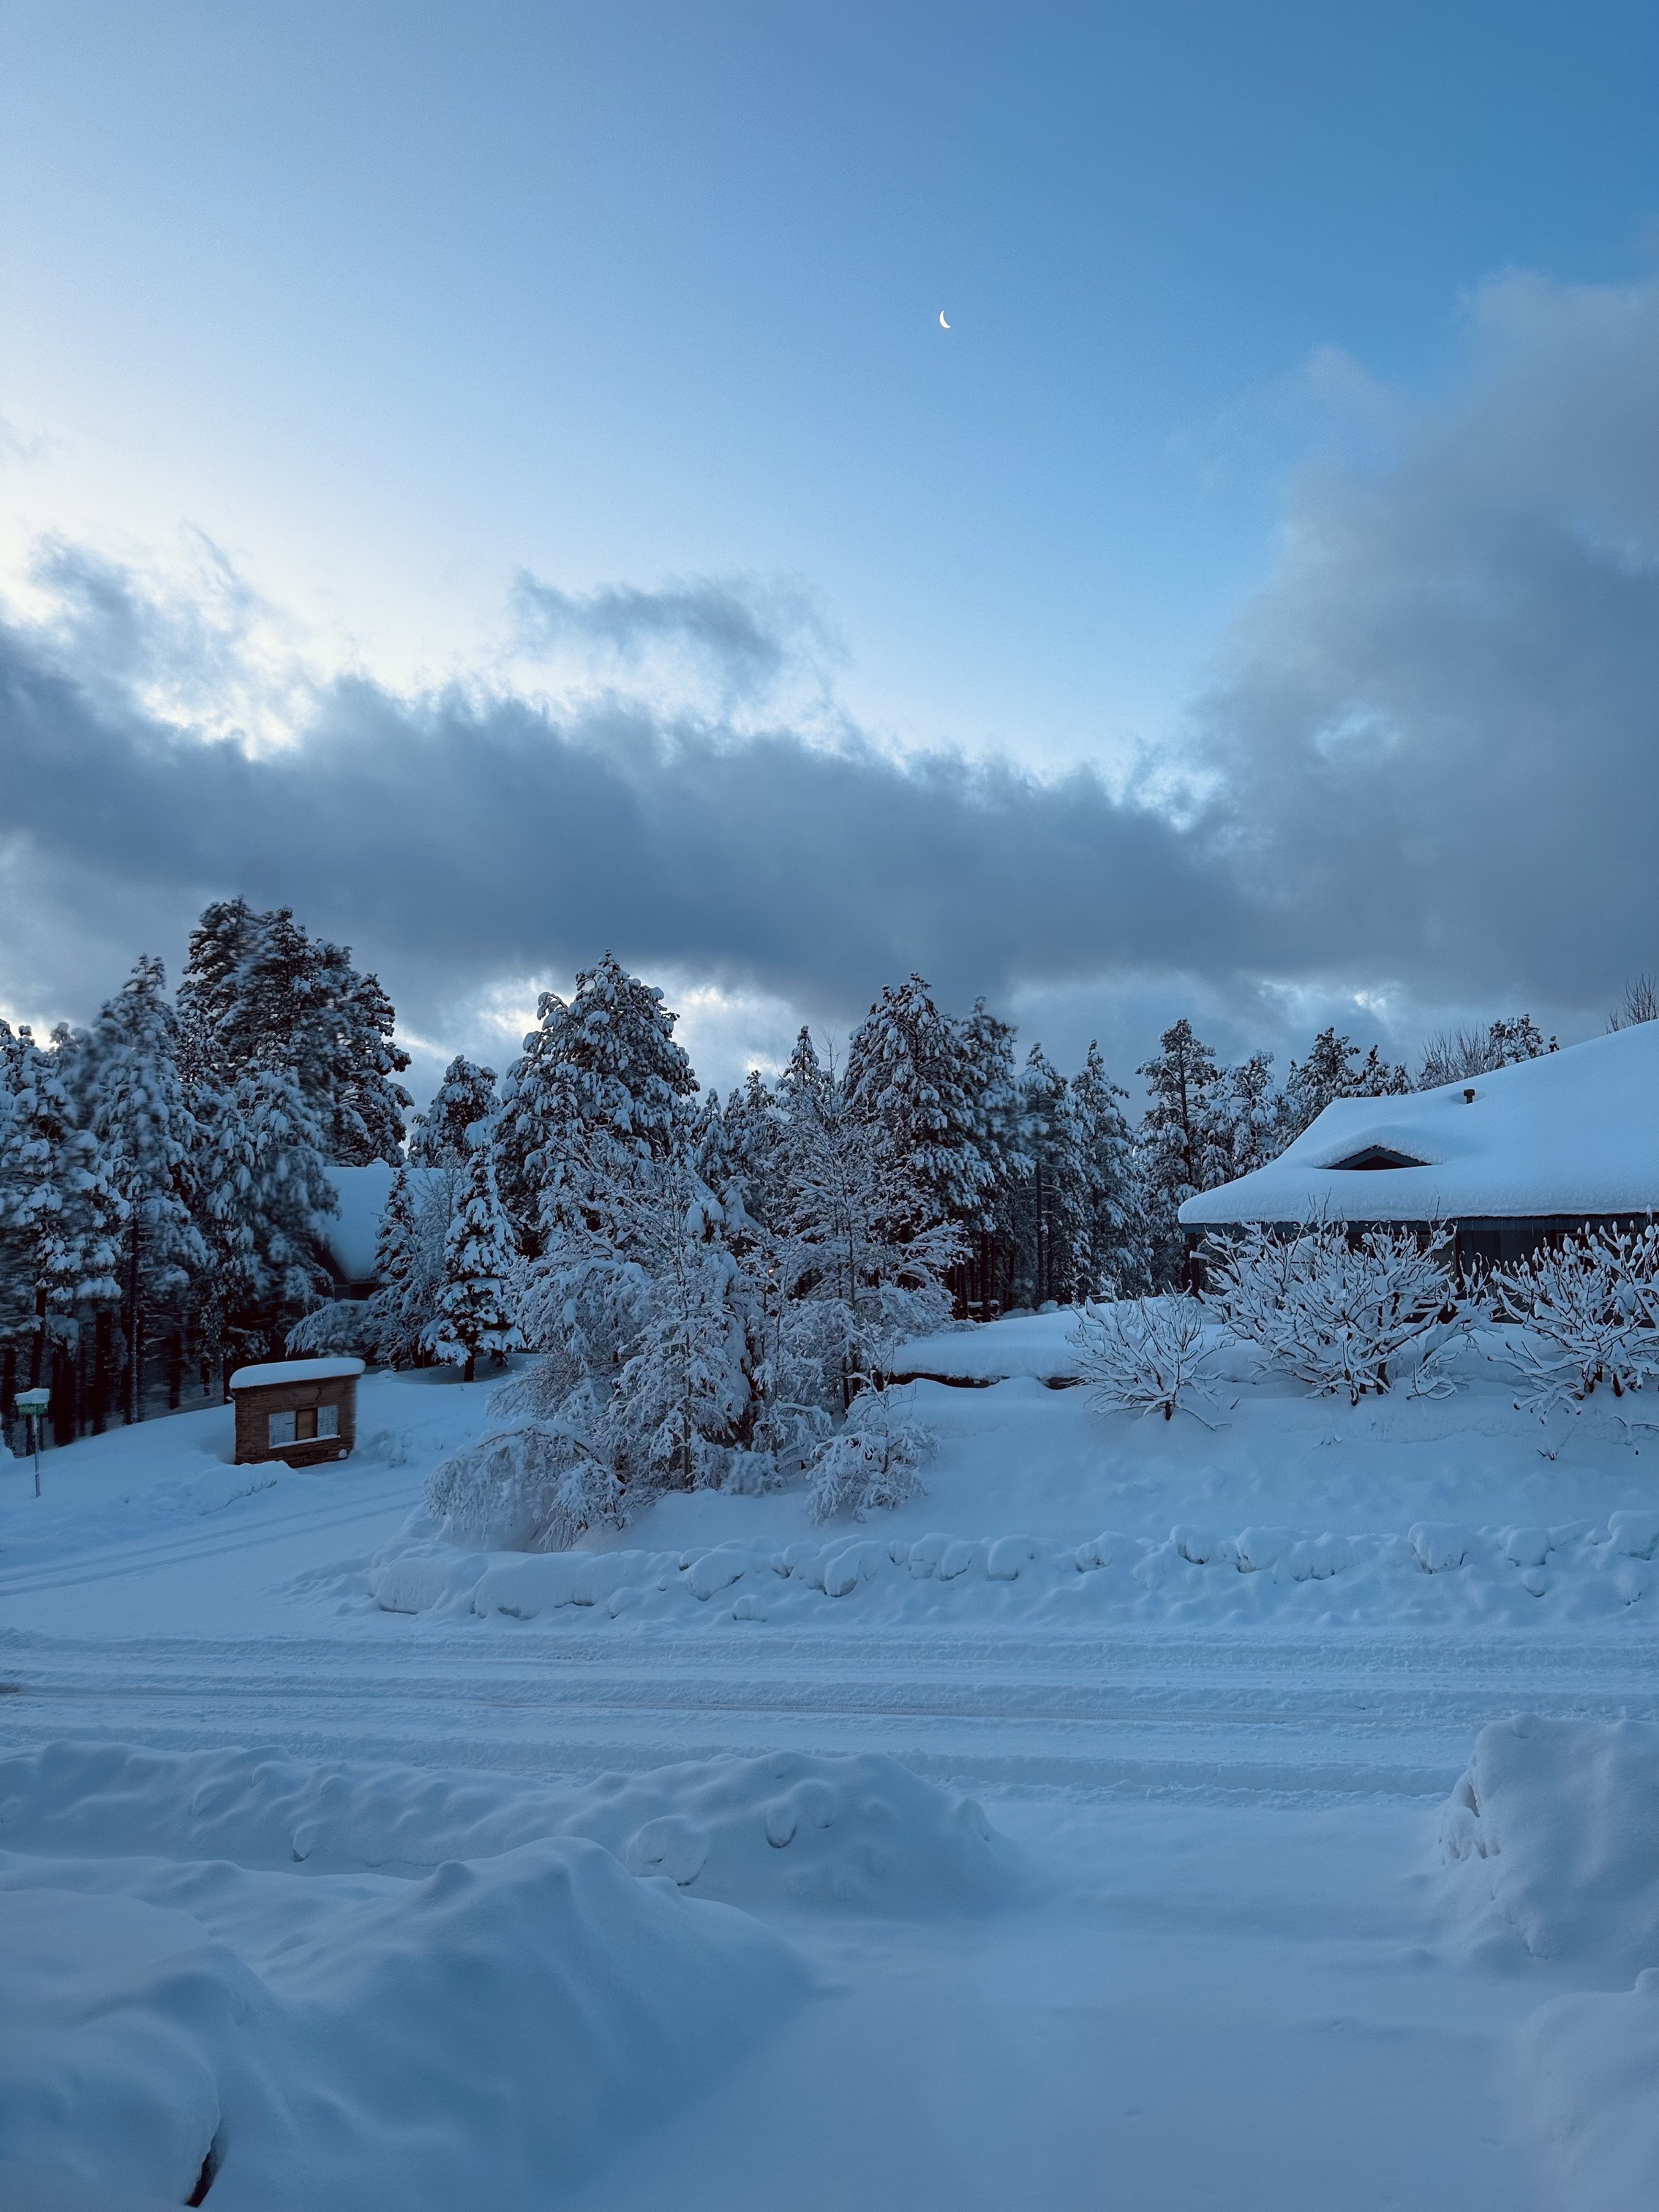 A sliver of crescent moon sits above a ponderosa pine lined street covered in snow. The street and snowbound house are in the foreground. Thin clouds are clearing beneath the moon, showing crystal blue morning sky behind them. 